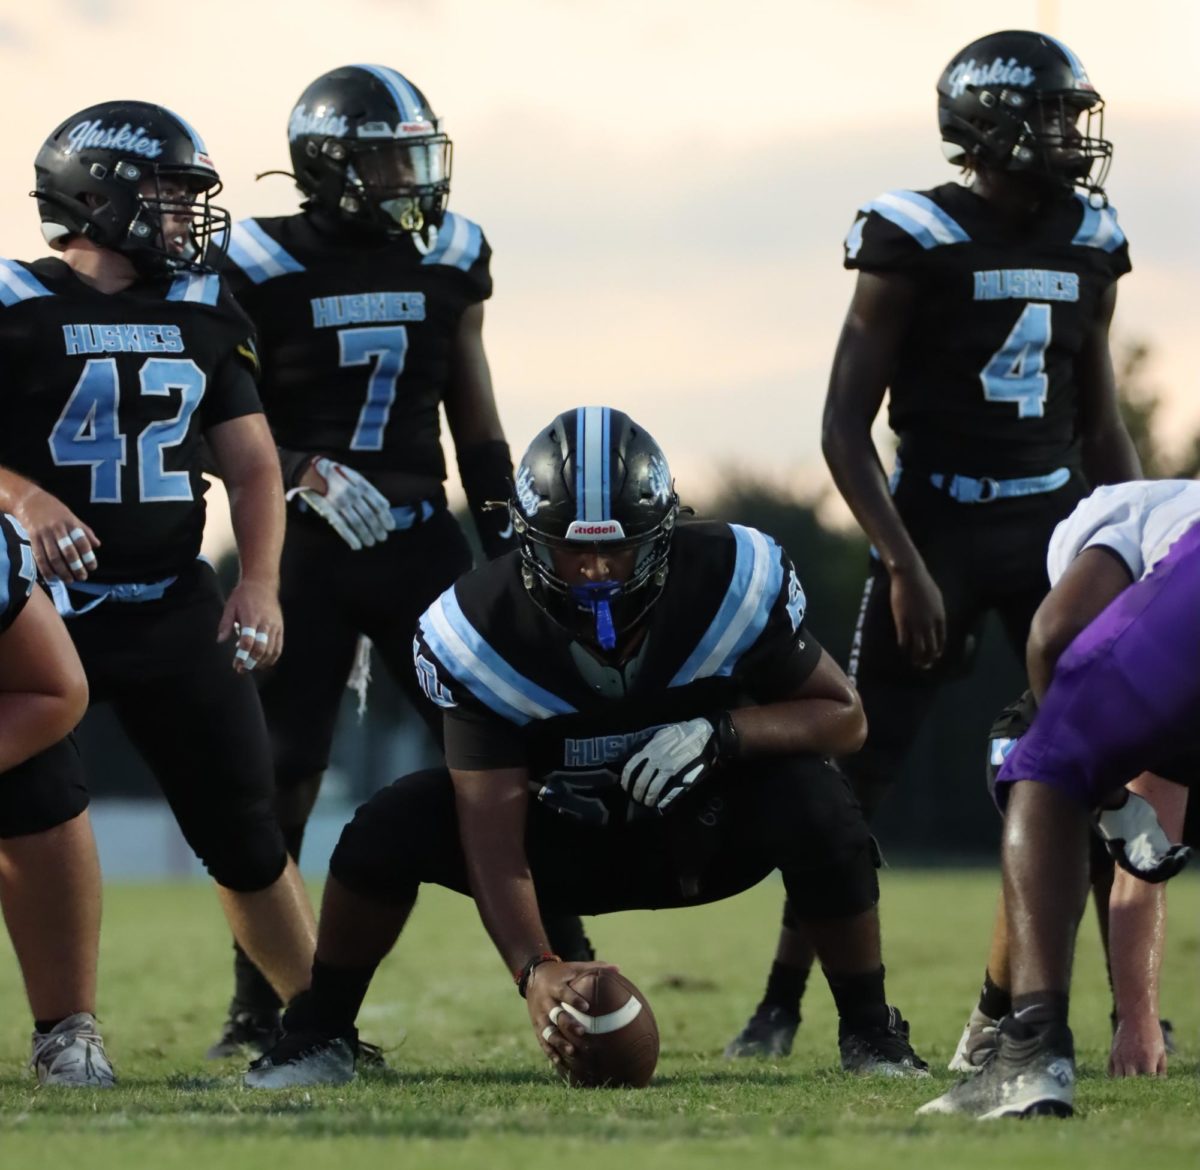 Center Jaymen Patel gets ready to snap the ball. The varsity football team won against Timber Creek 14-10.